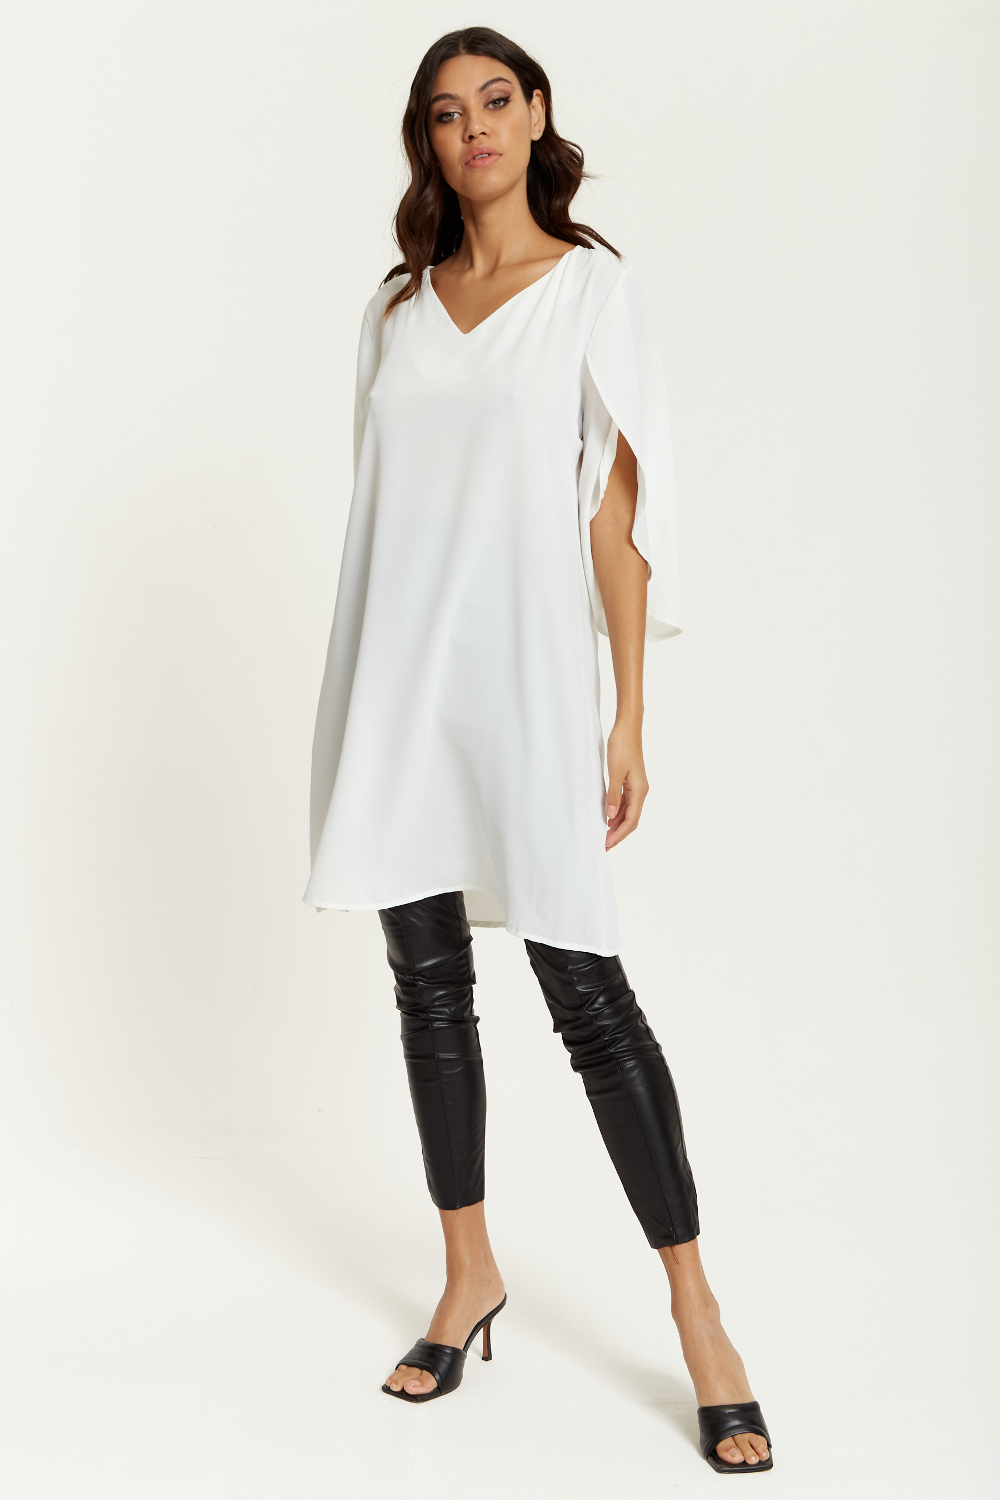 Oversized V Neck Tunic with Split Sleeves in White GLR FASHION NETWORKING